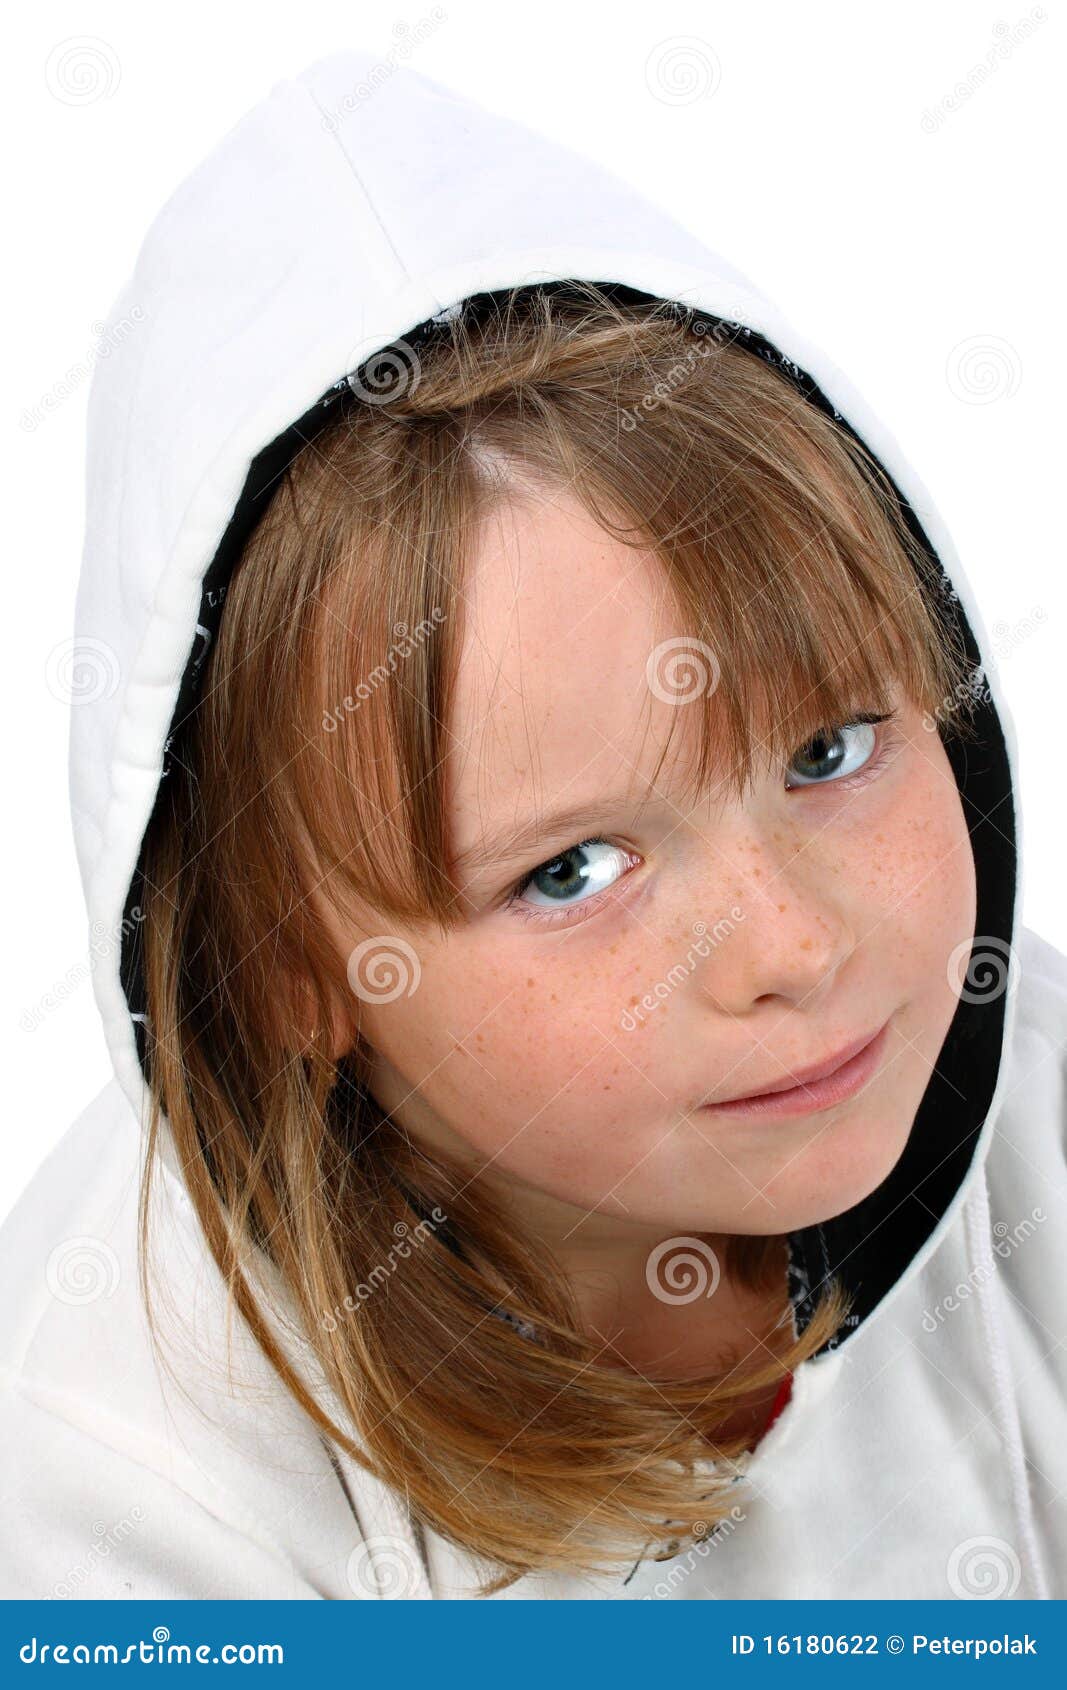 Small Girl with Long Hair in White Hood Isolated Stock Photo - Image of ...